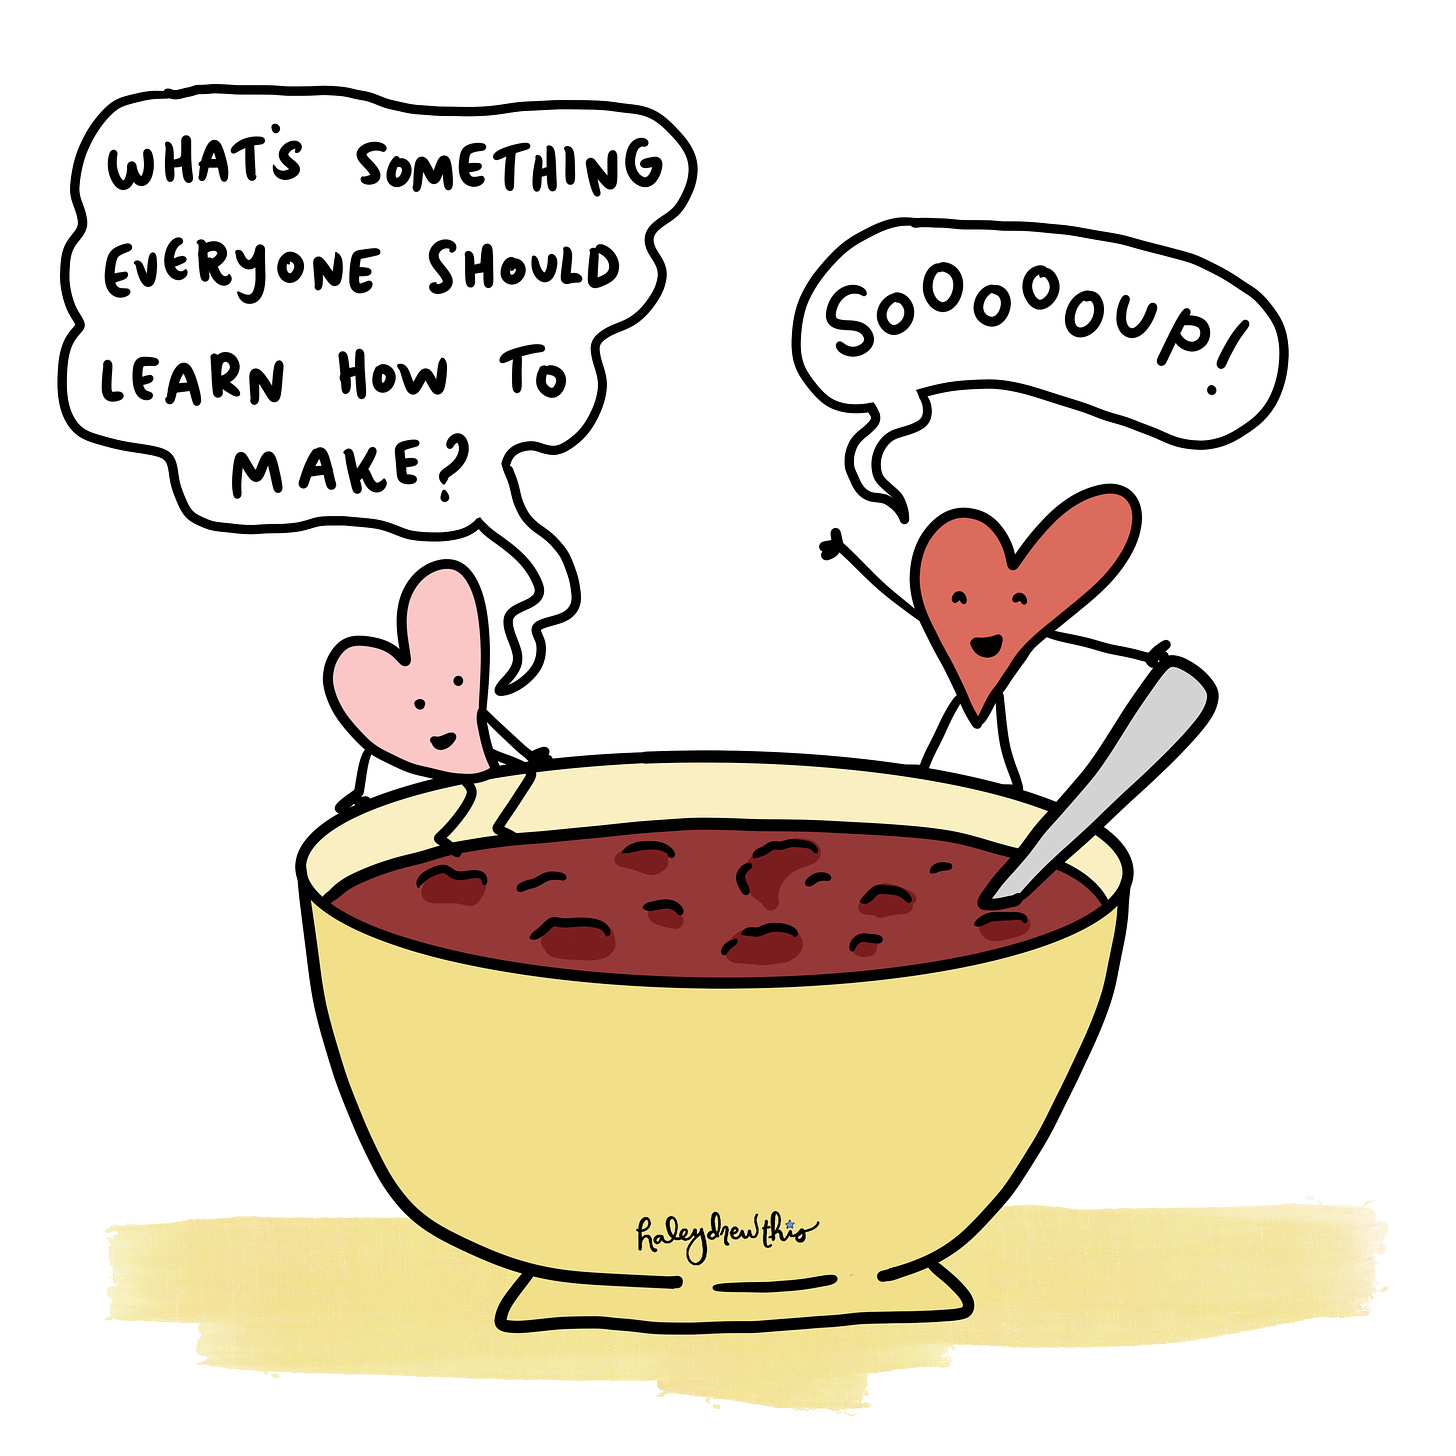 Reads: what's something everyone should learn how to make? Soup!